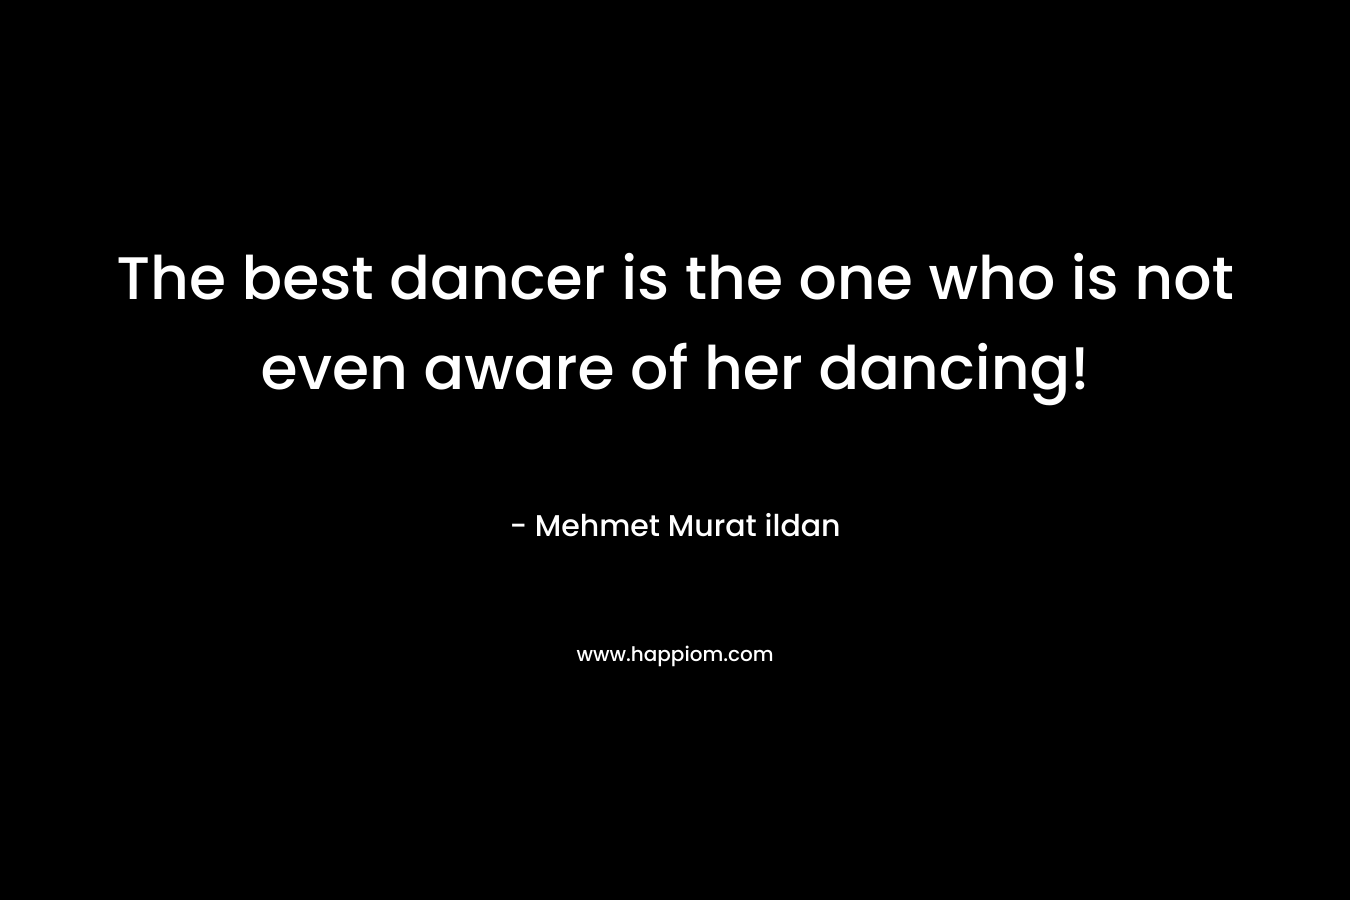 The best dancer is the one who is not even aware of her dancing!